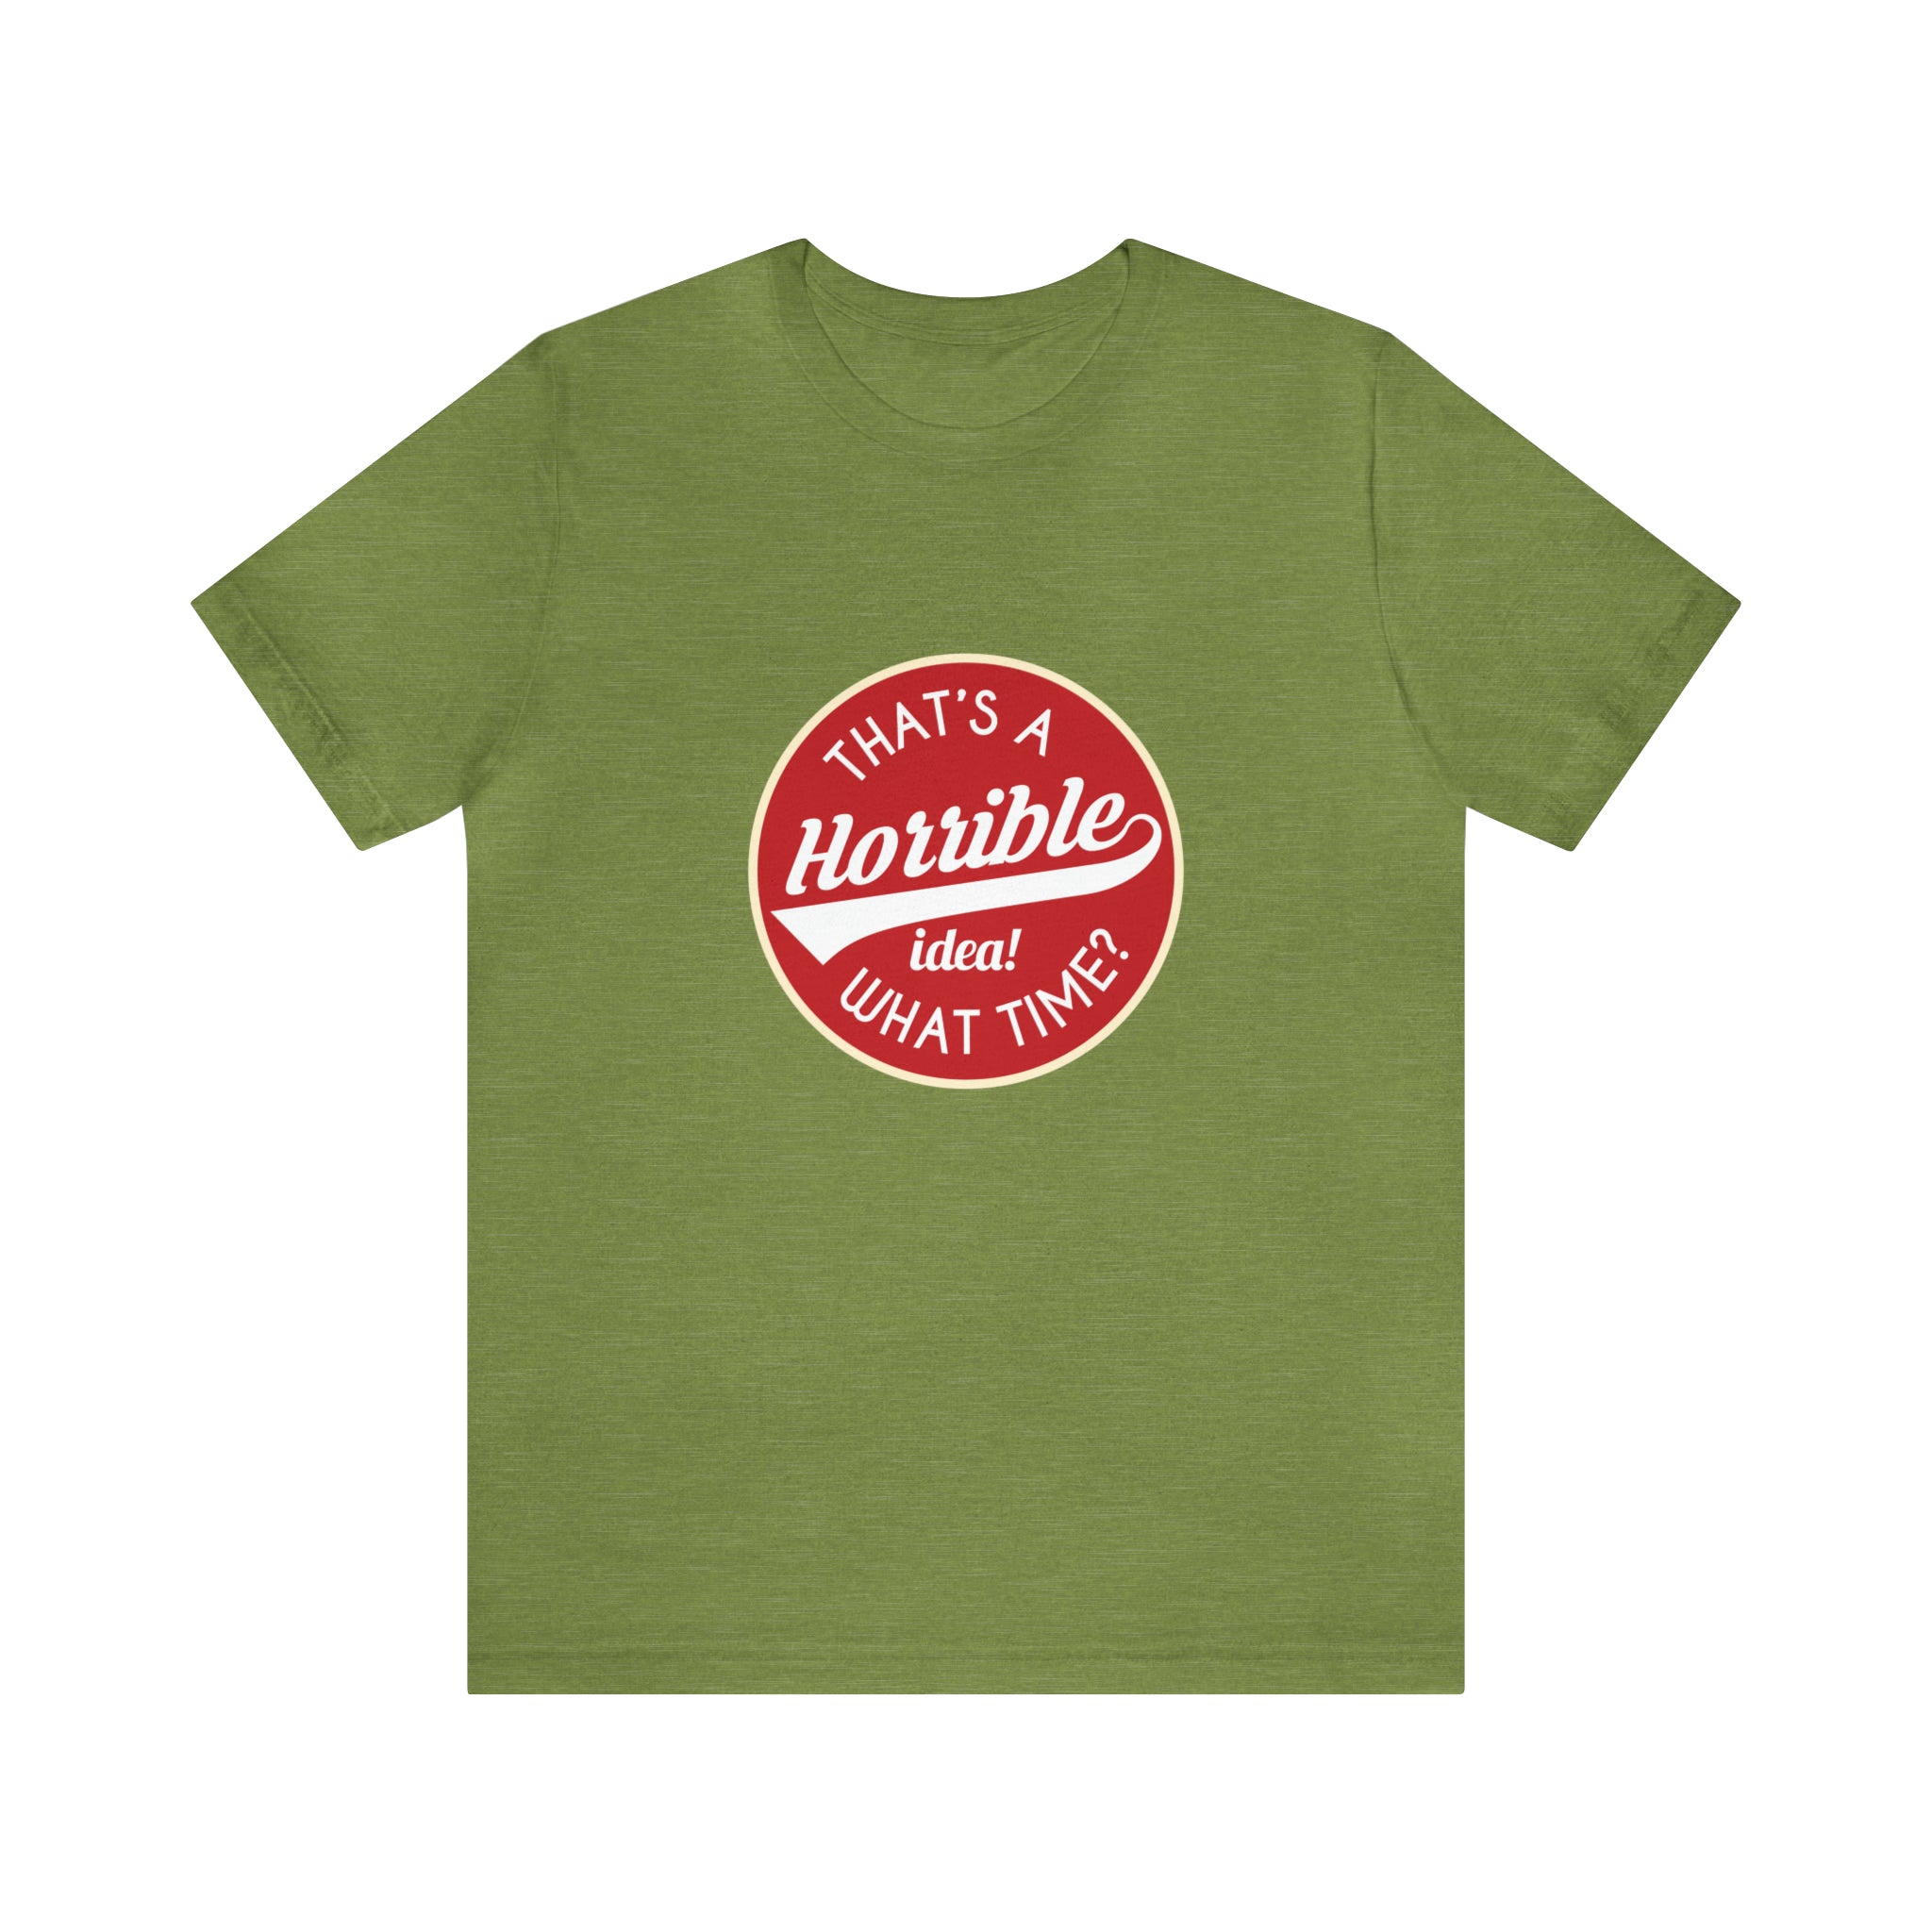 A That's a horrible idea - what time T-Shirt with a green background and a red logo.